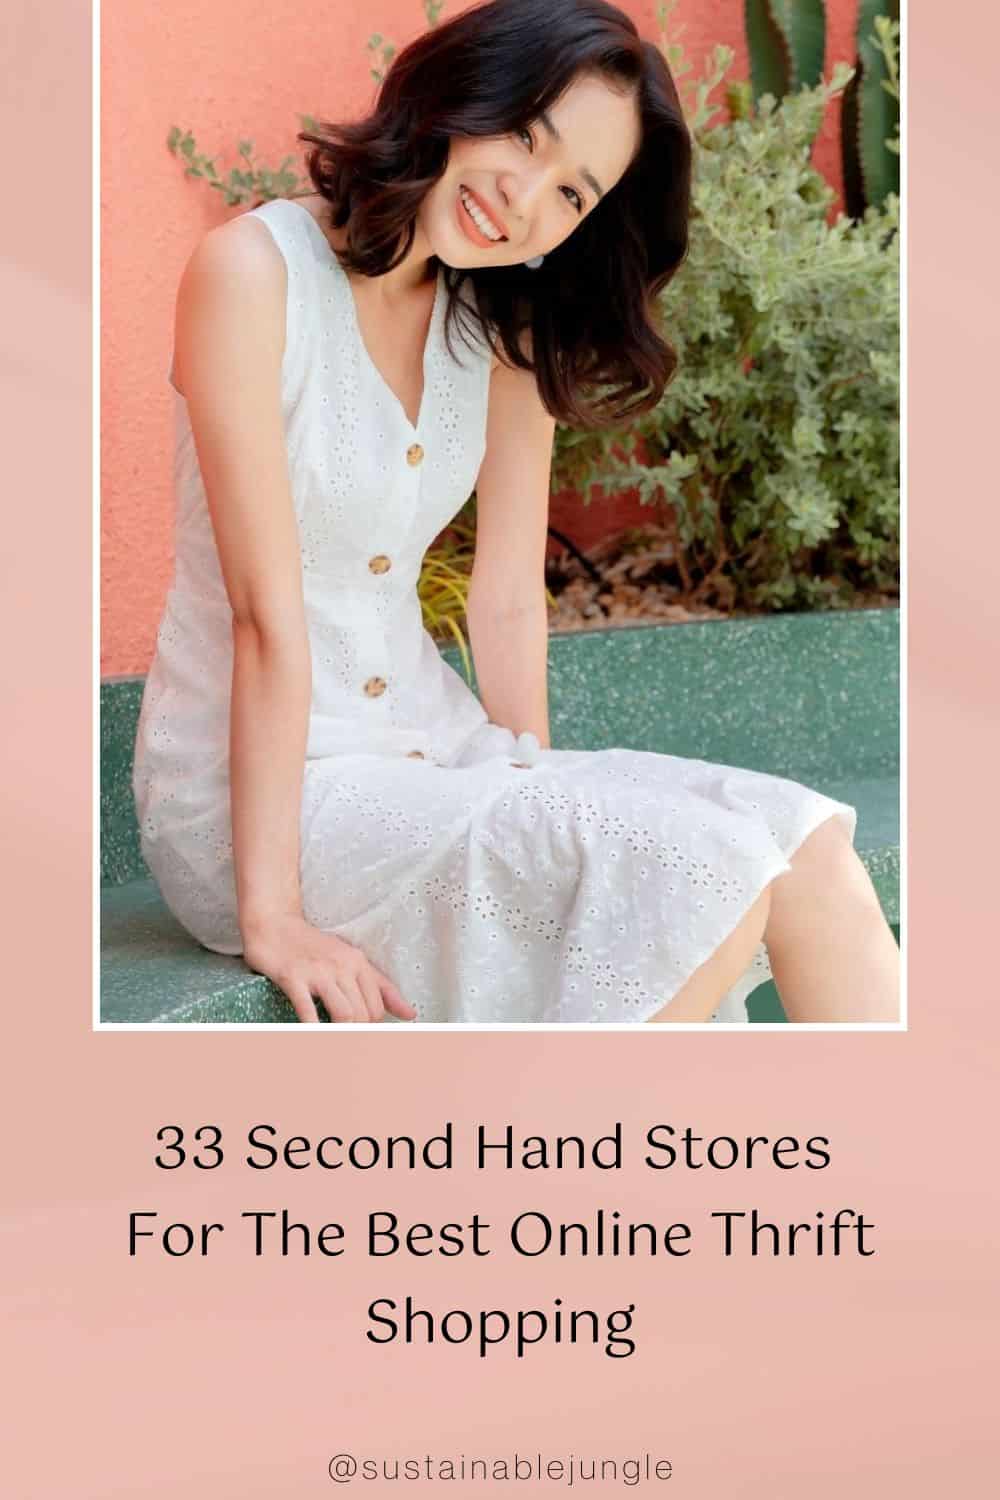 33 Second Hand Stores For The Best Online Thrift Shopping Image by Swap #secondhandstores #secondhandstoresonline #secondhandonlinestores #onlinethriftstores #bestonlinethriftstores #thriftshoppingonline #sustainablejungle